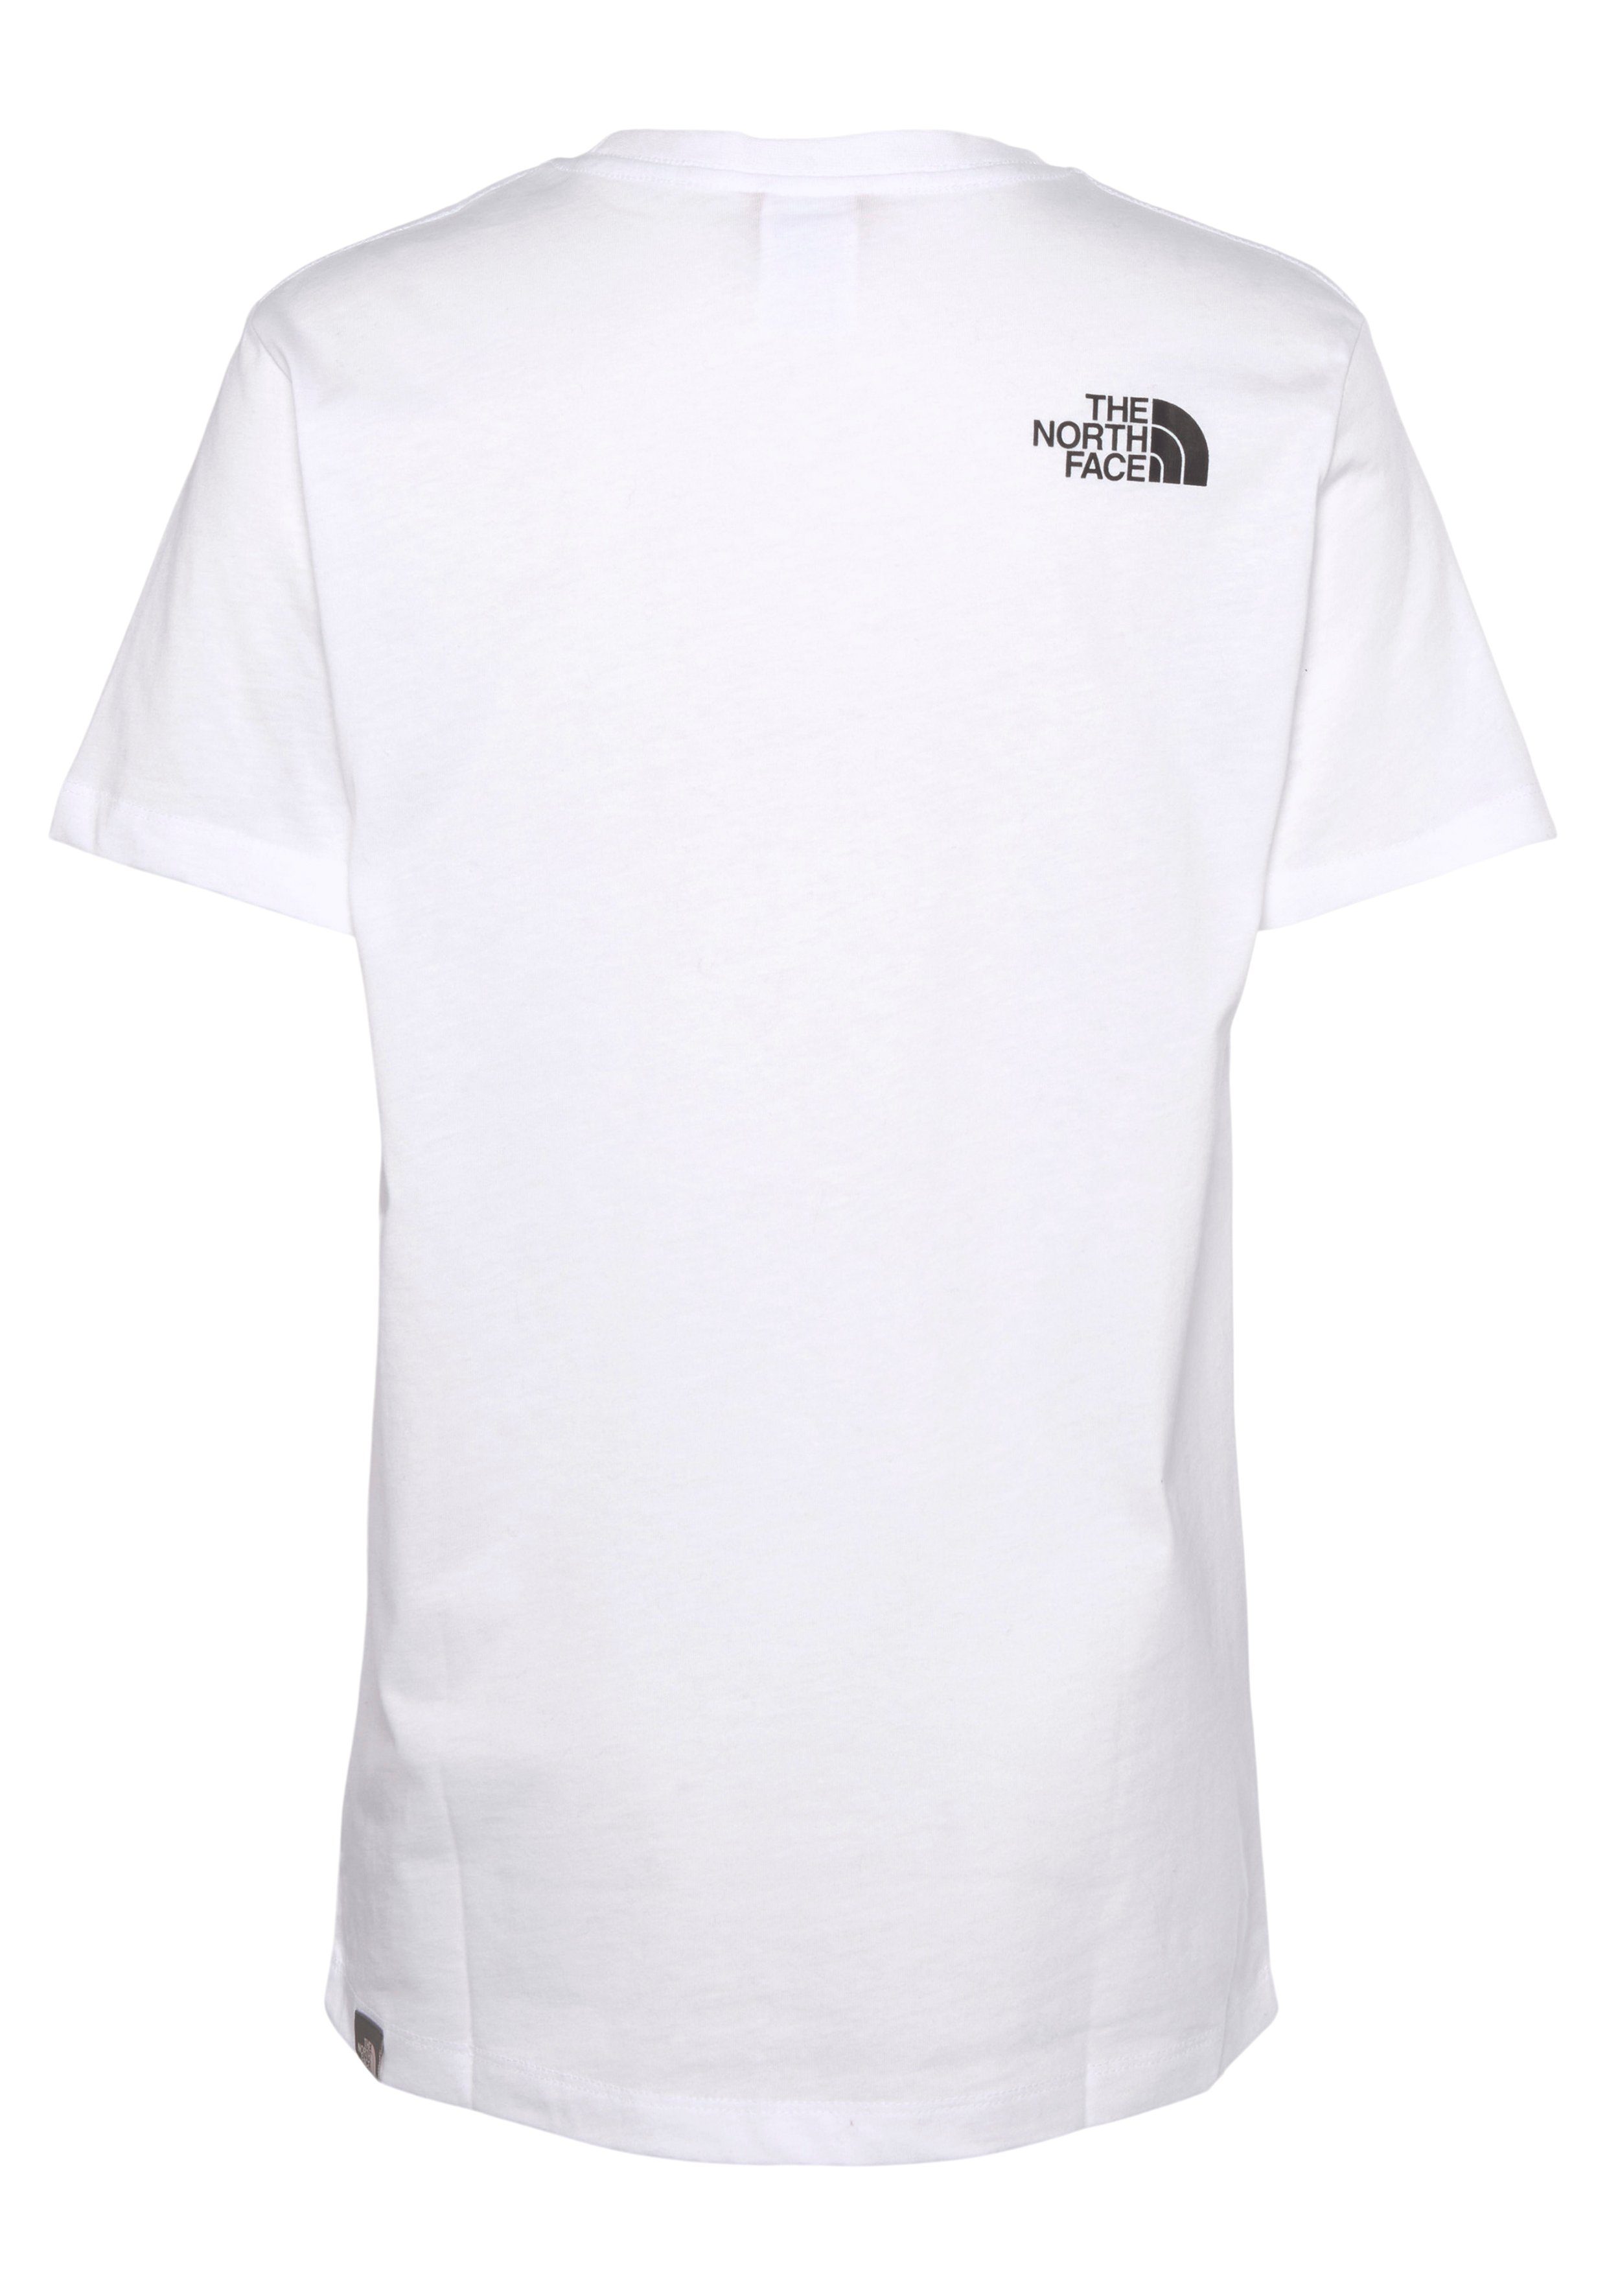 TEE North white für Kinder The EASY Face T-Shirt -